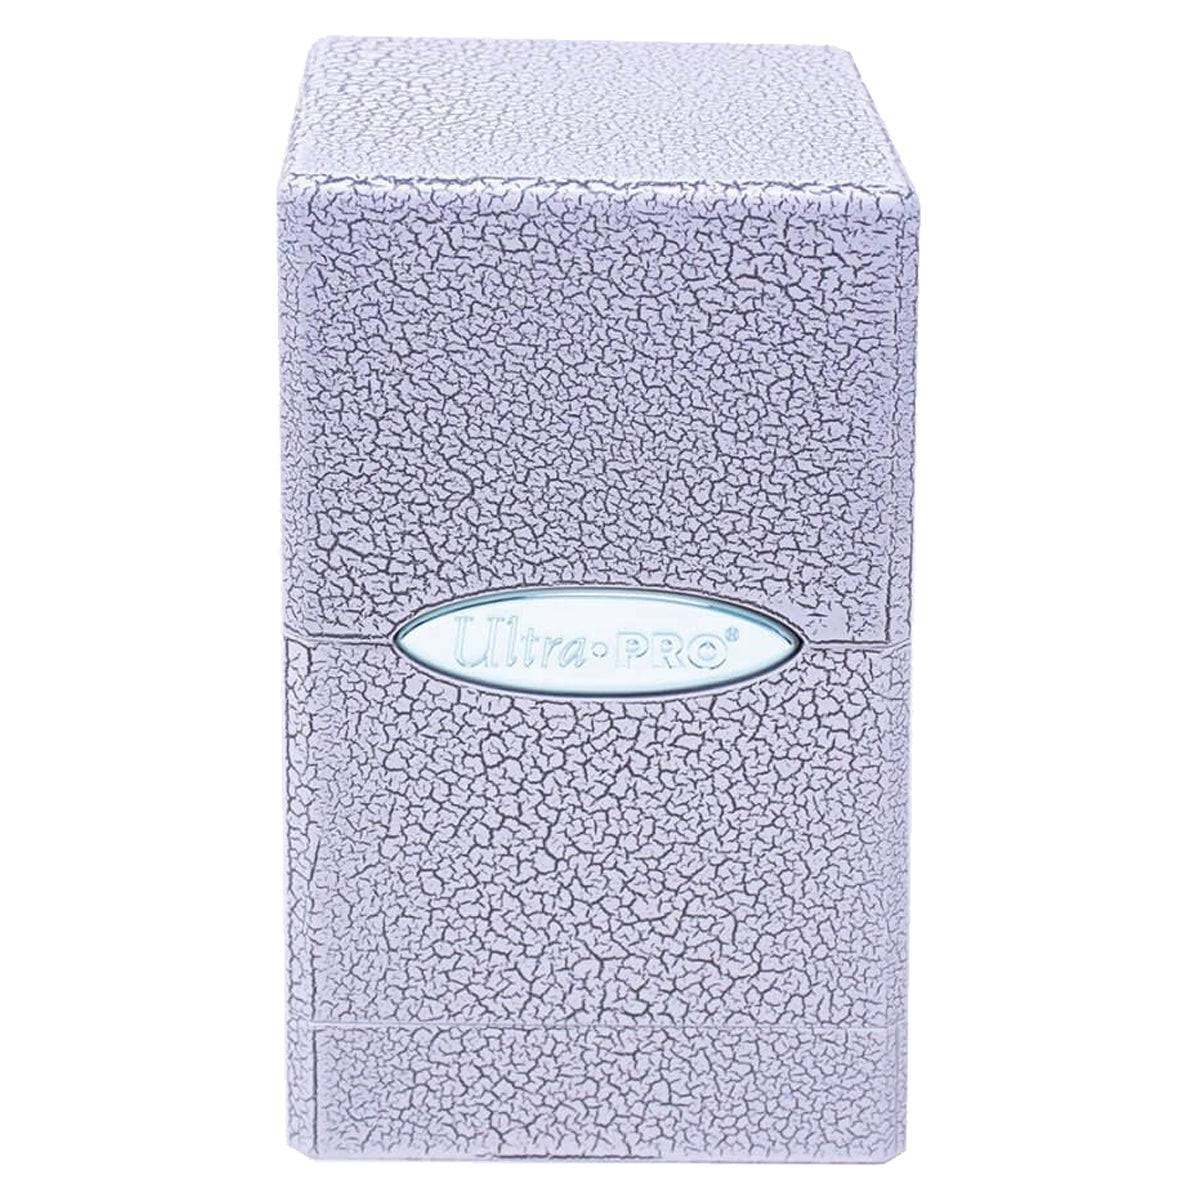 Ultra Pro Ivory Crackle Satin Tower Deck Box